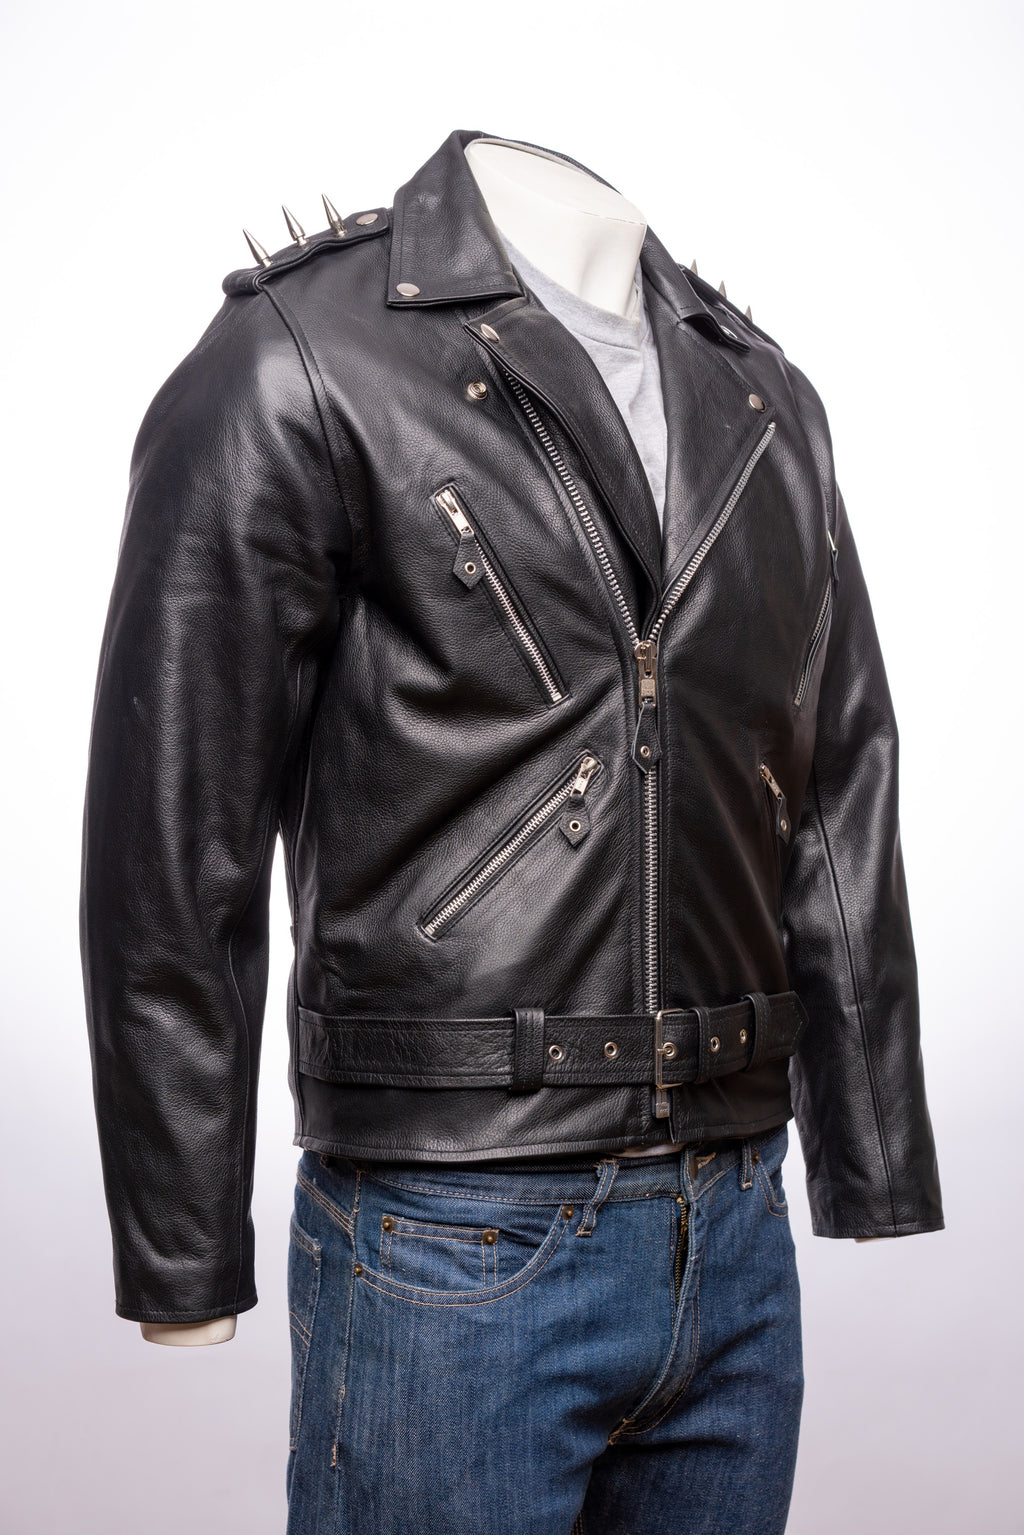 Men's Cow Hide Brando Style Jacket With Spike Detail: Sidney